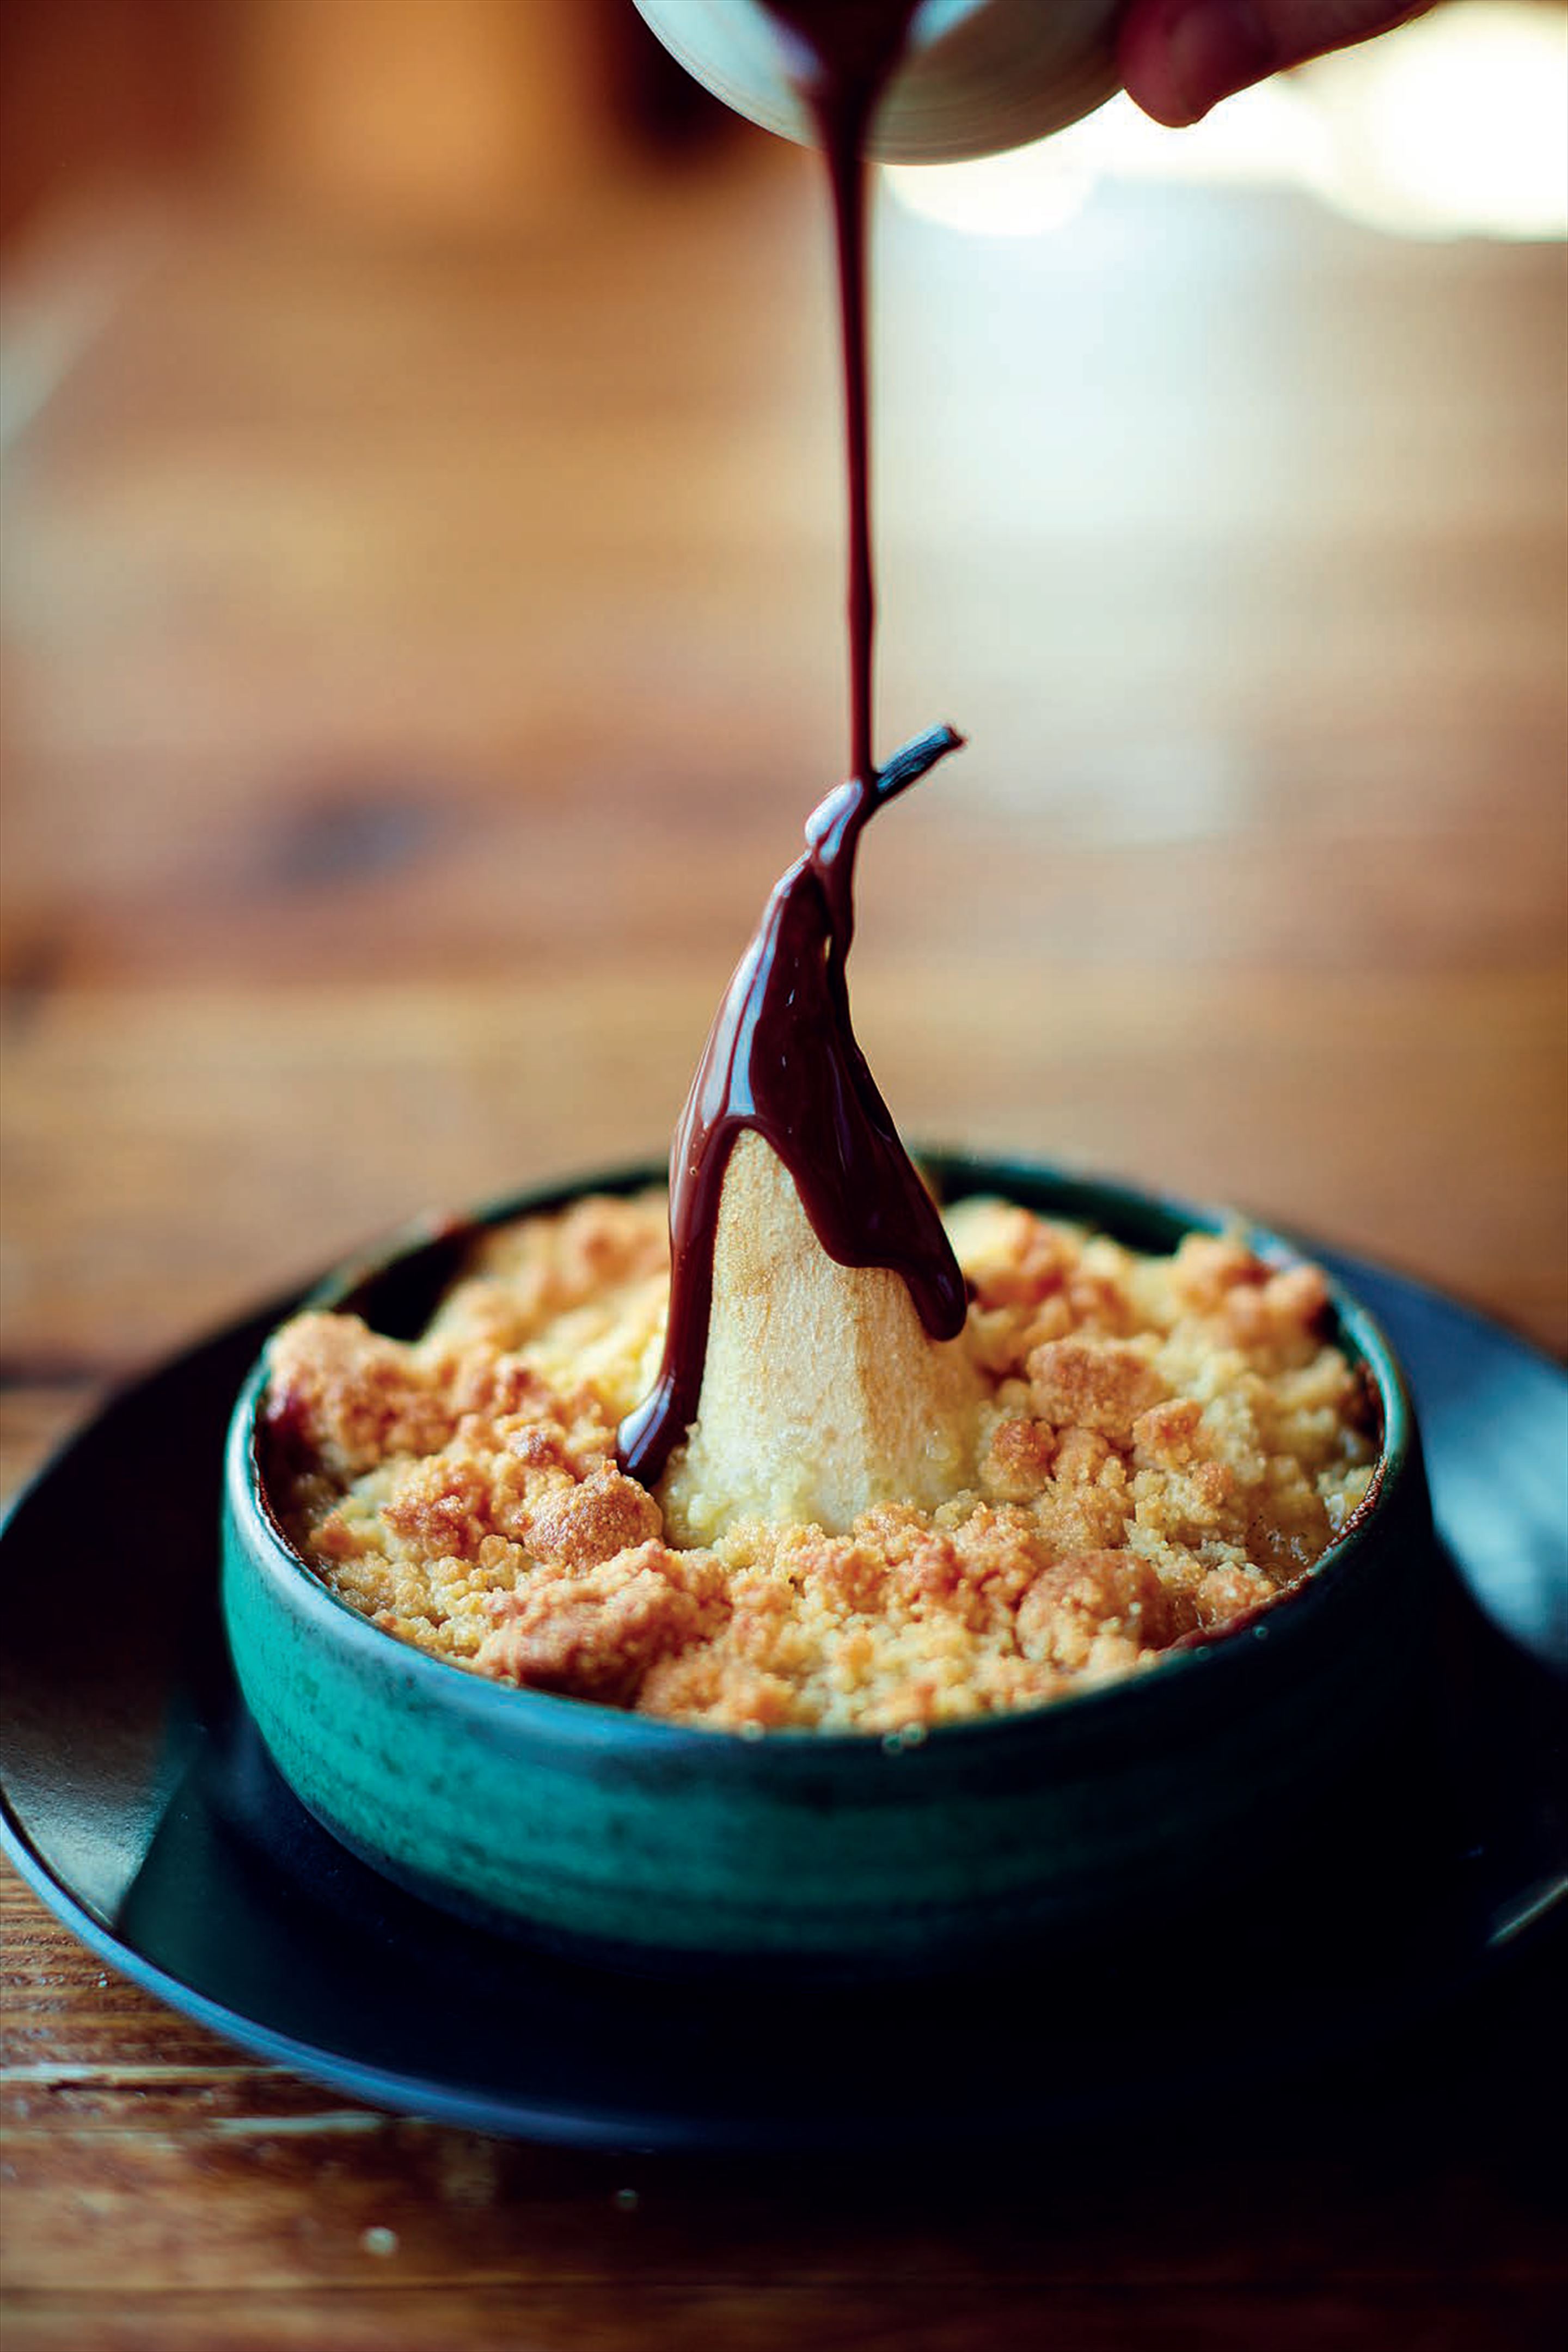 Pear crumble with earl grey chocolate sauce